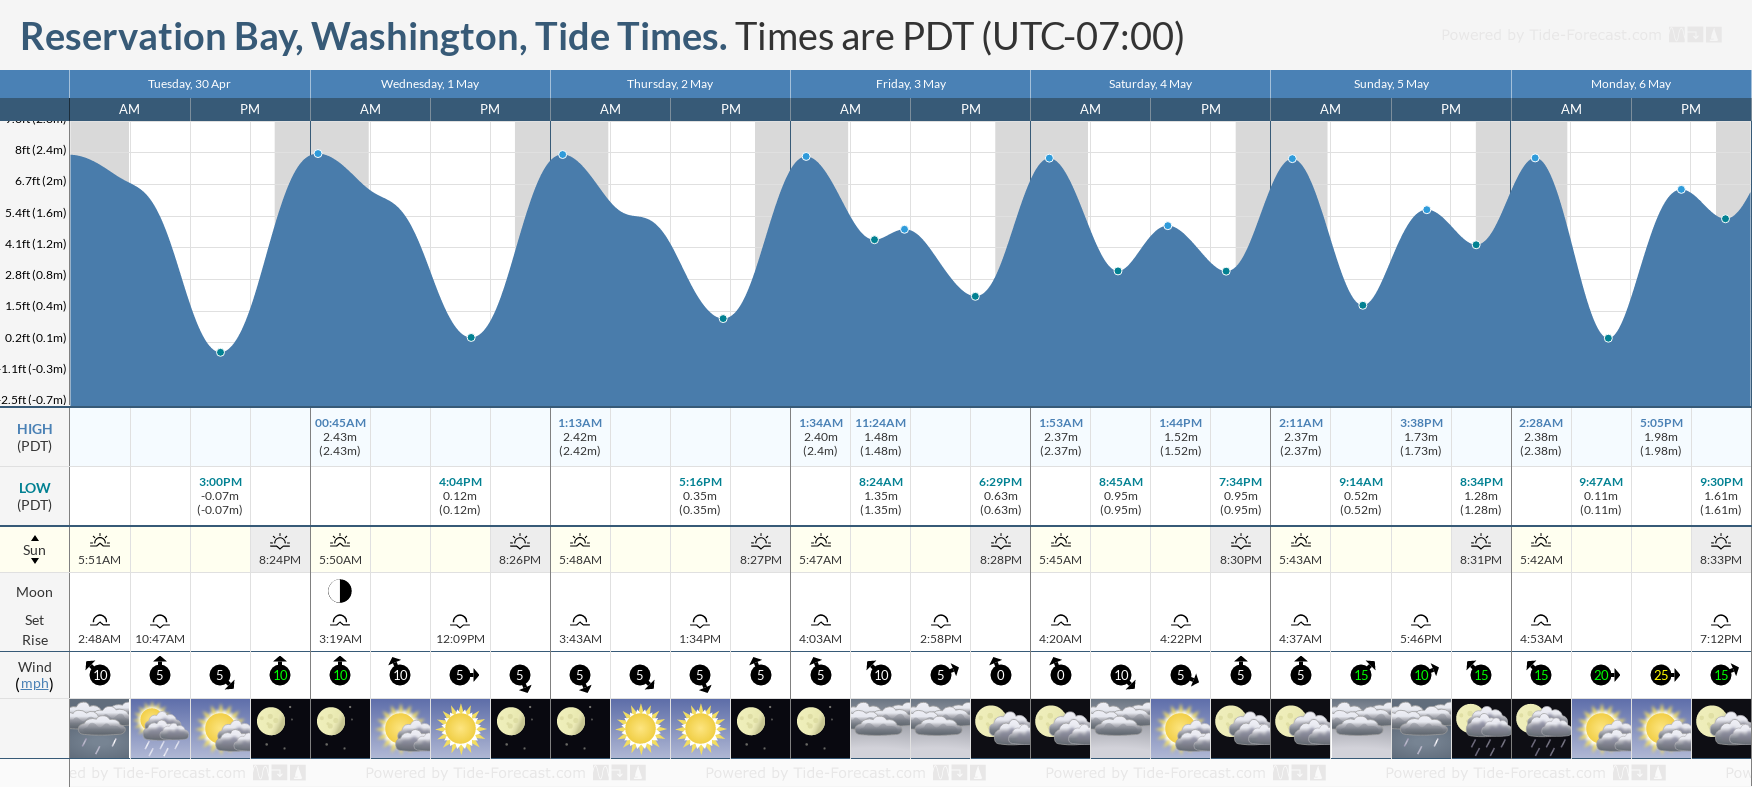 Reservation Bay, Washington Tide Chart including high and low tide times for the next 7 days